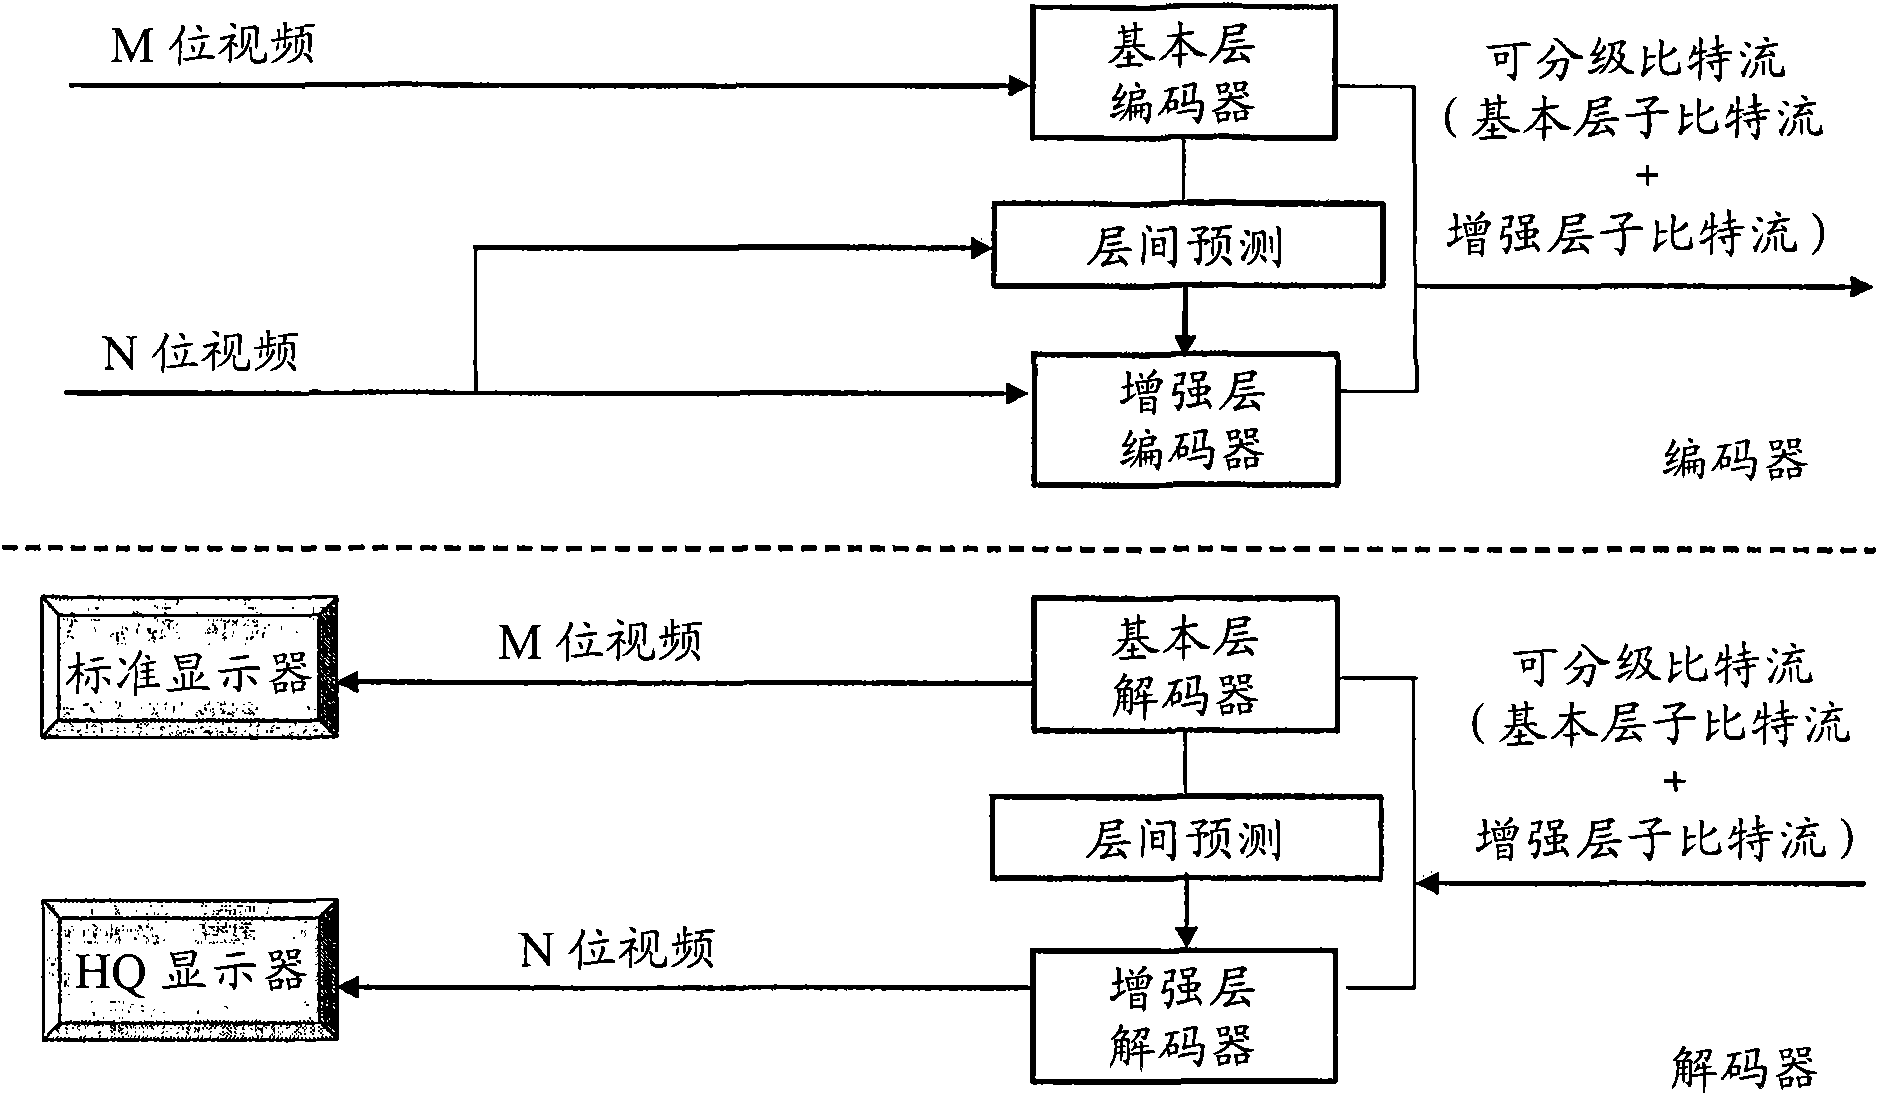 Video encoding method and video decoding method for enabling bit depth scalability